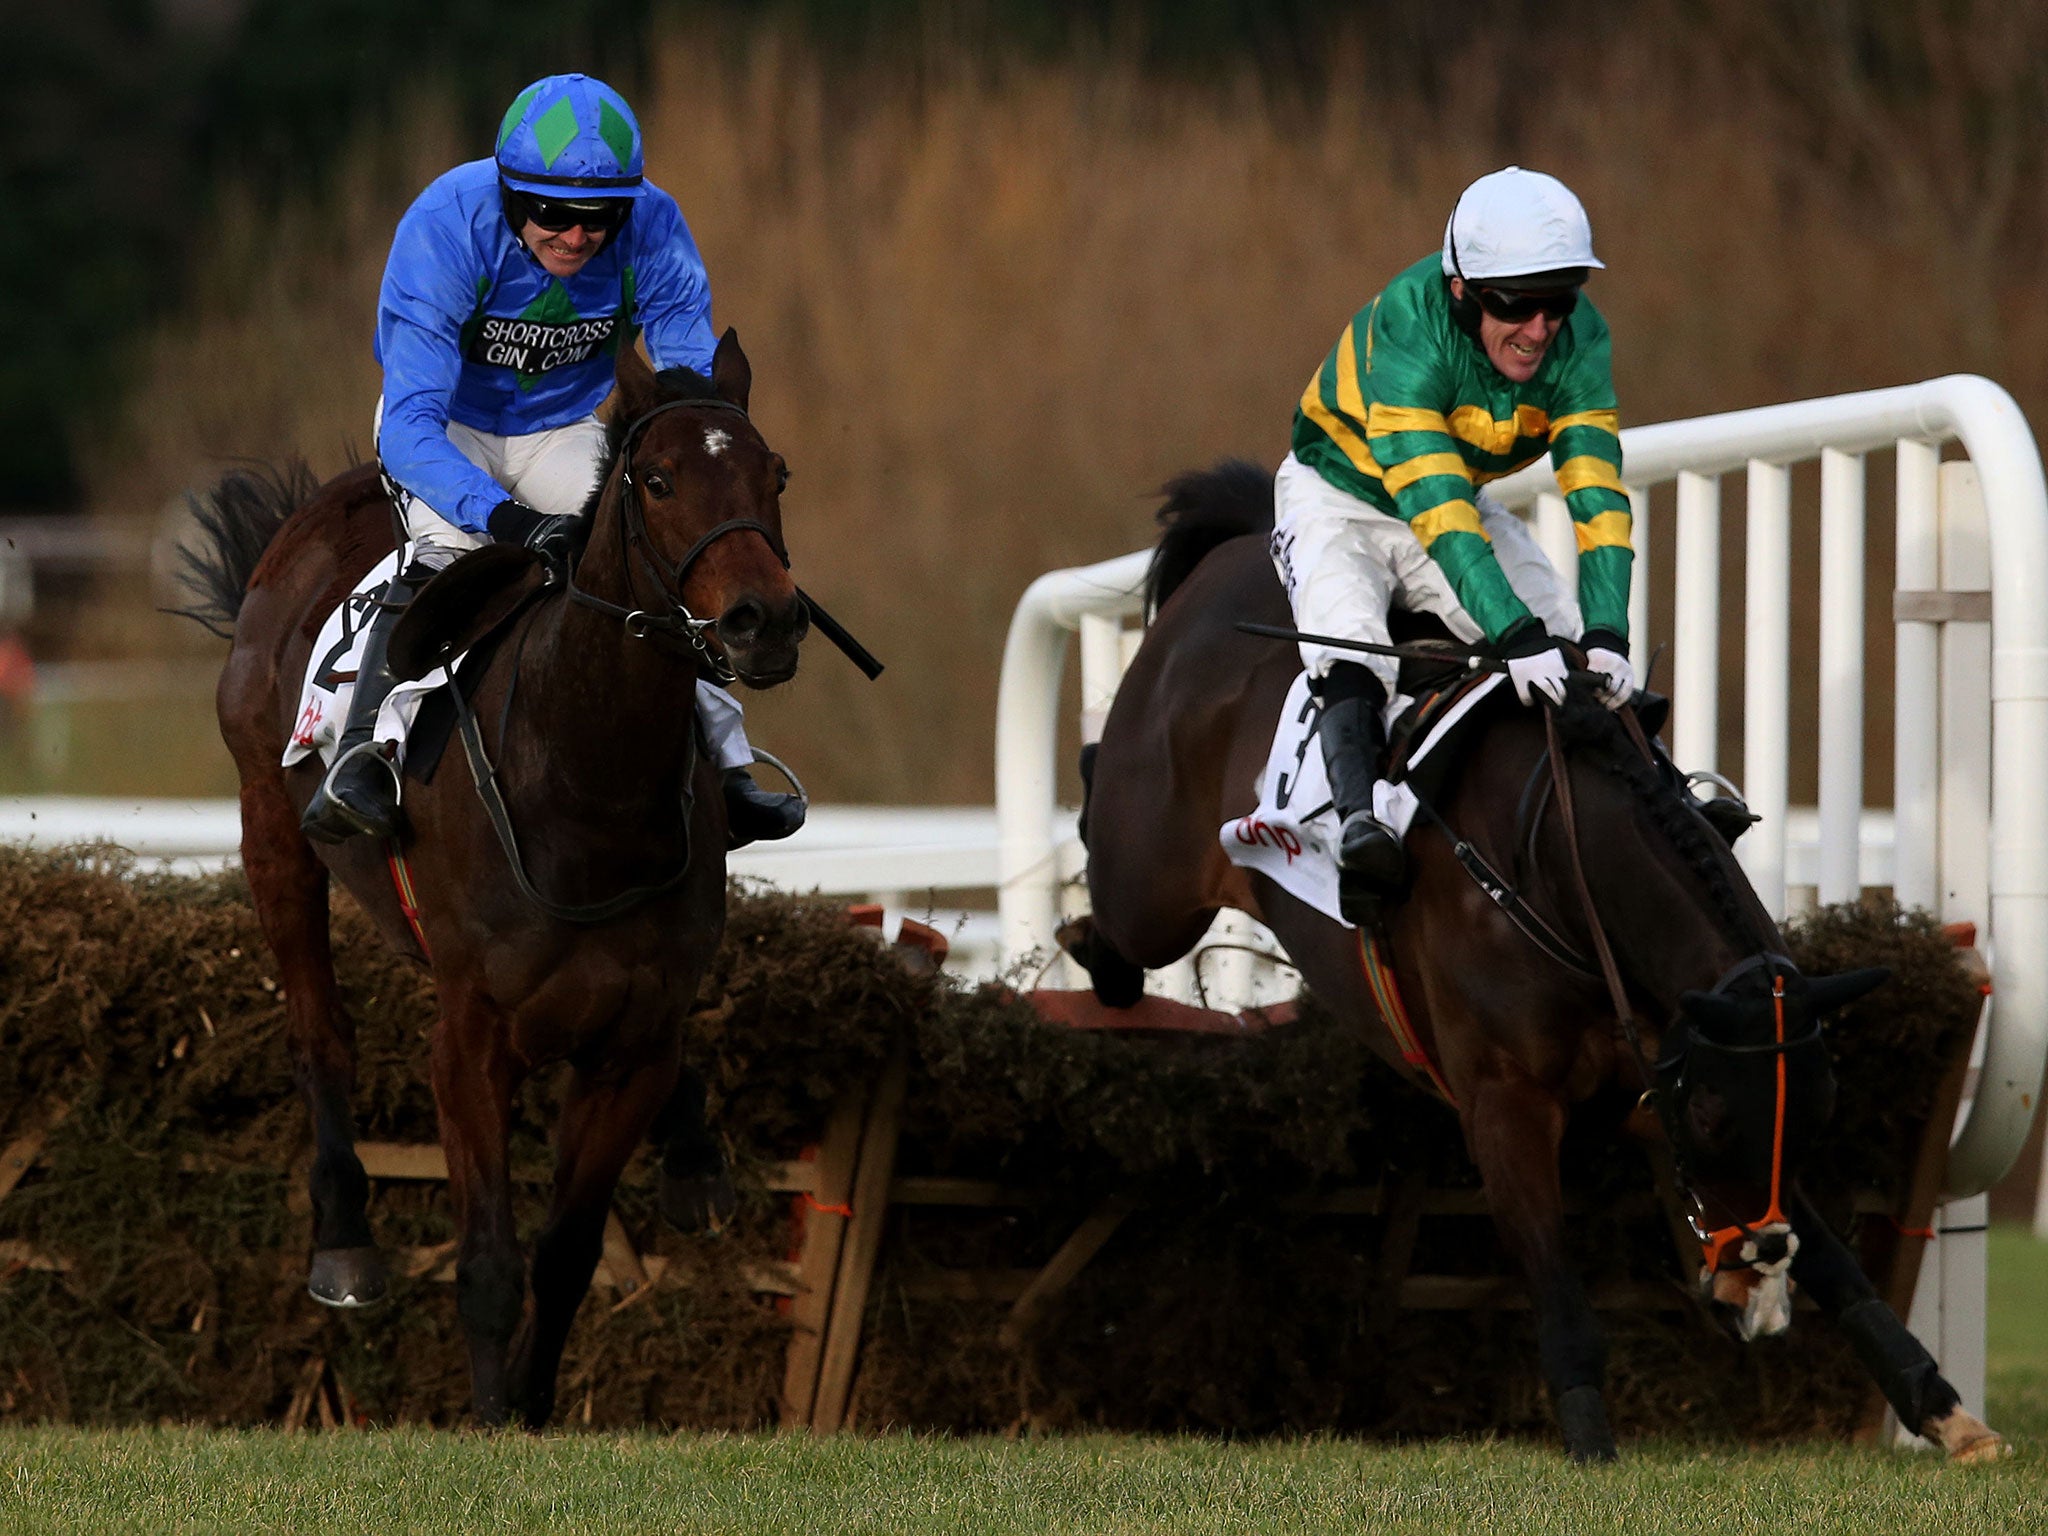 Hurricane Fly clears the last as old rival Jezki blunders in the Irish Champion Hurdle